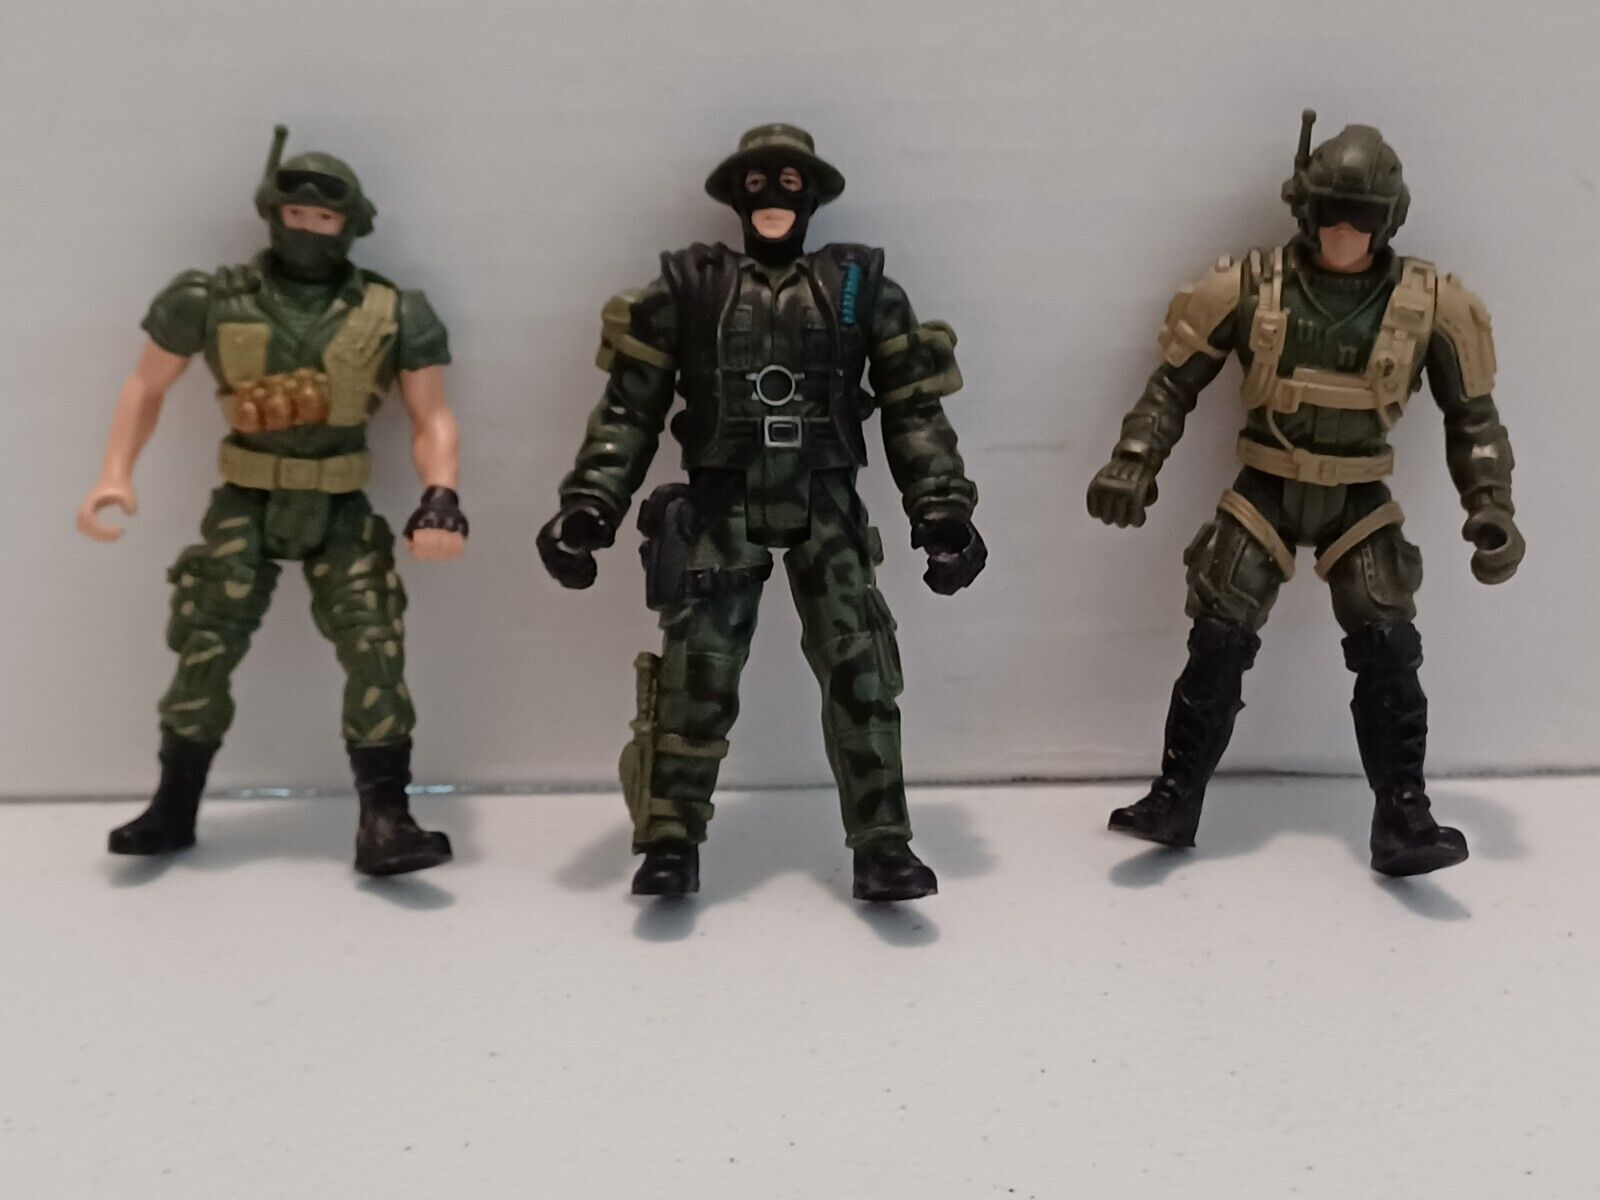 Lot of 3 Chap Mei SOLDIER FORCE IV Combat Military Trooper Action Figure Toy